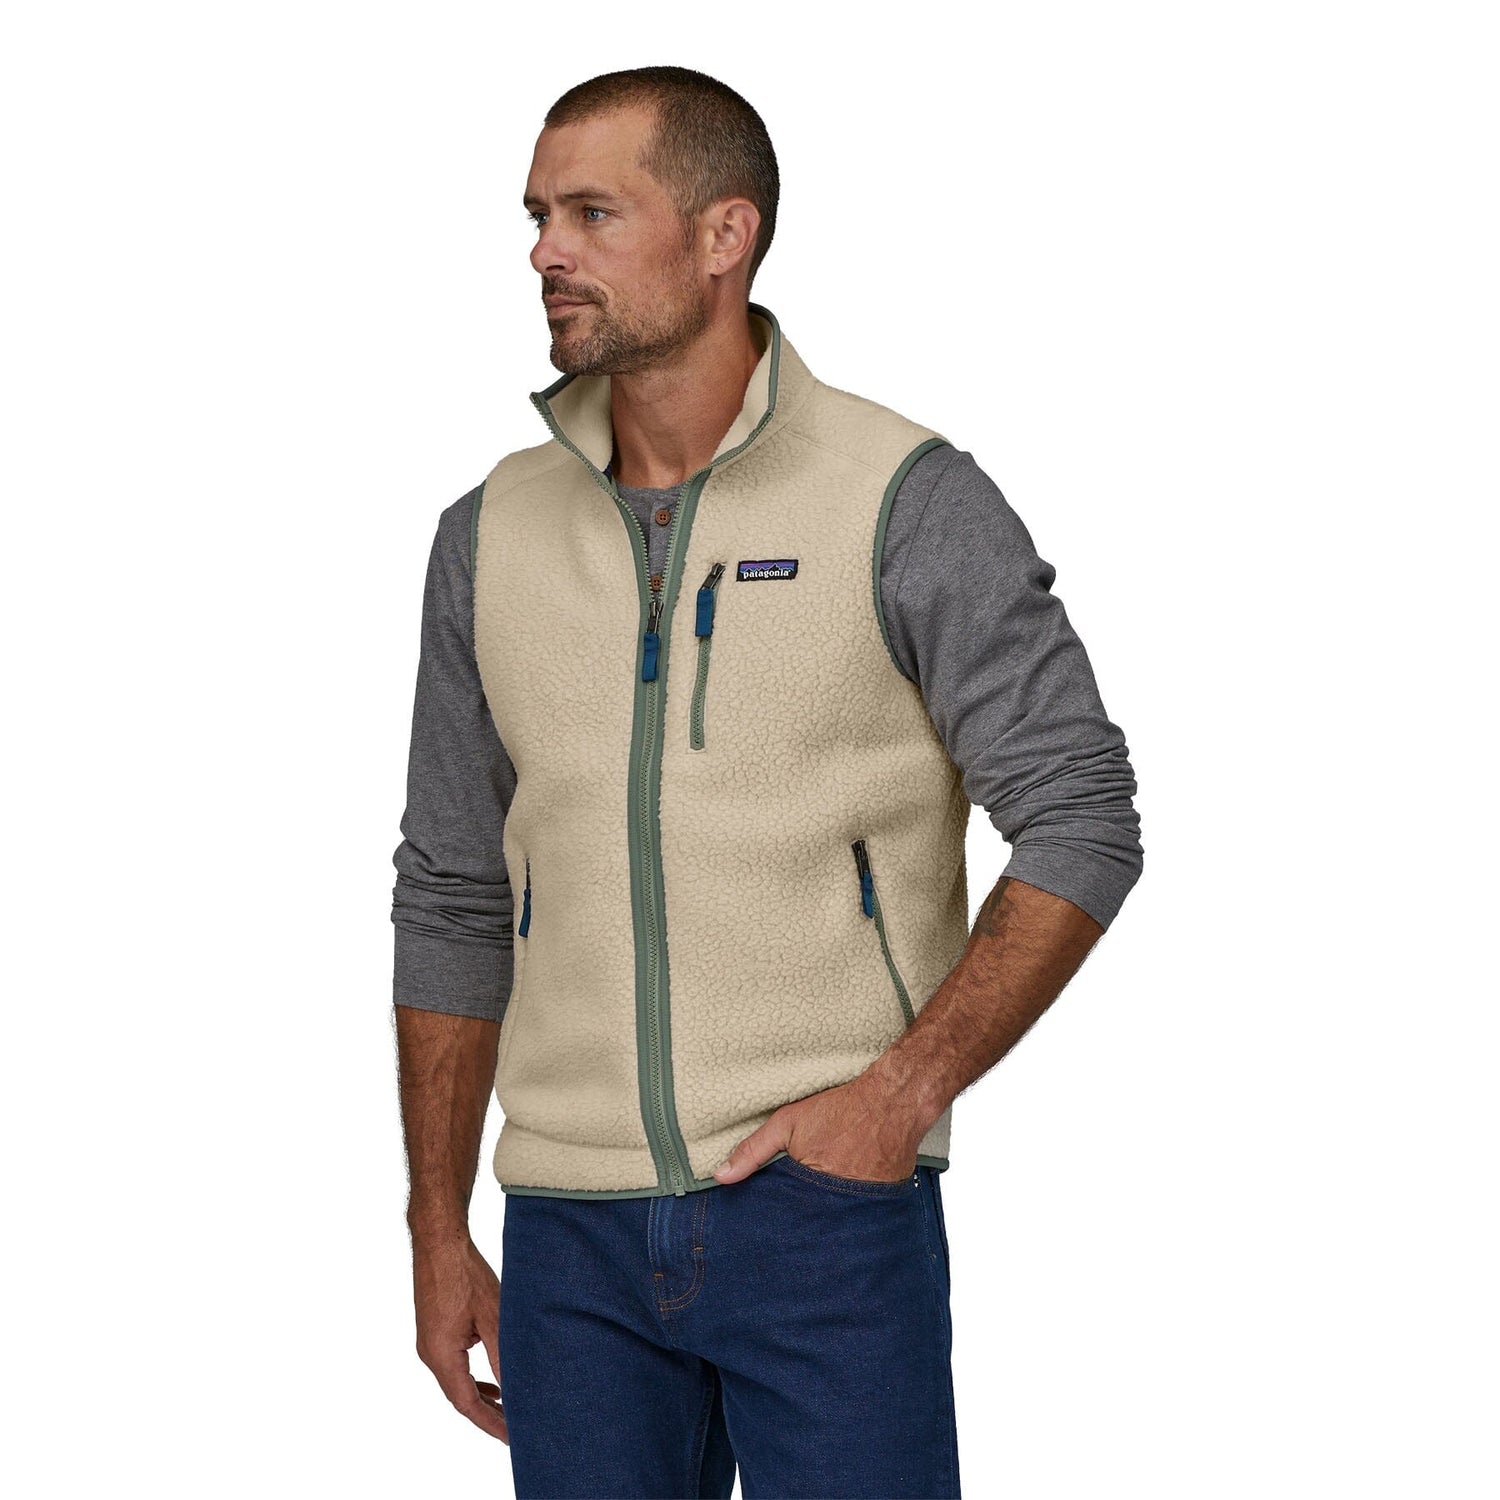 Patagonia M's Retro Pile Vest - Recycled polyester Dark Natural L Jacket